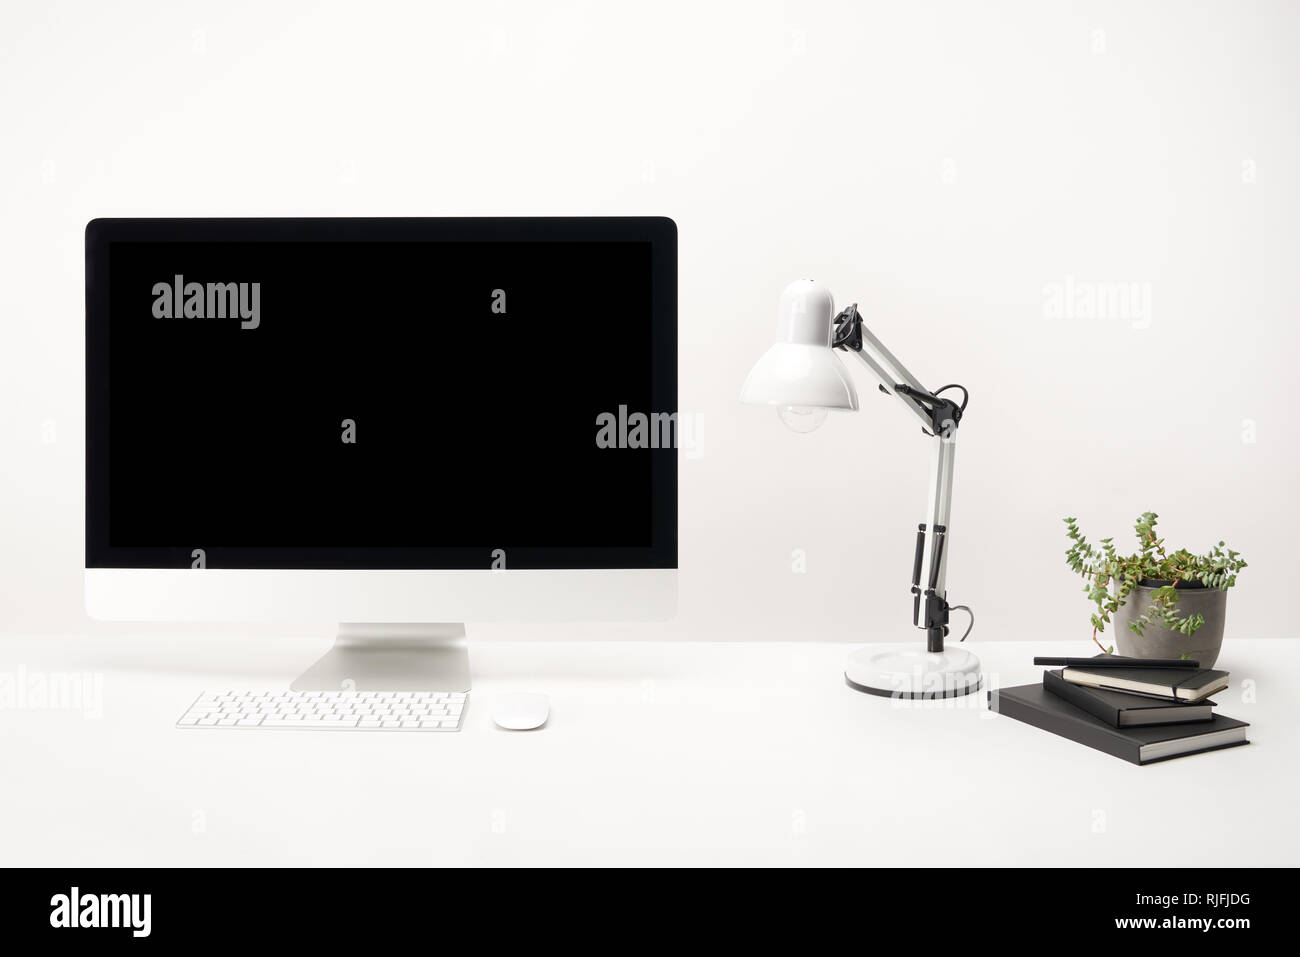 Workplace With Computer And Decoration And Lamp Free Stock Photo and Image  410769580